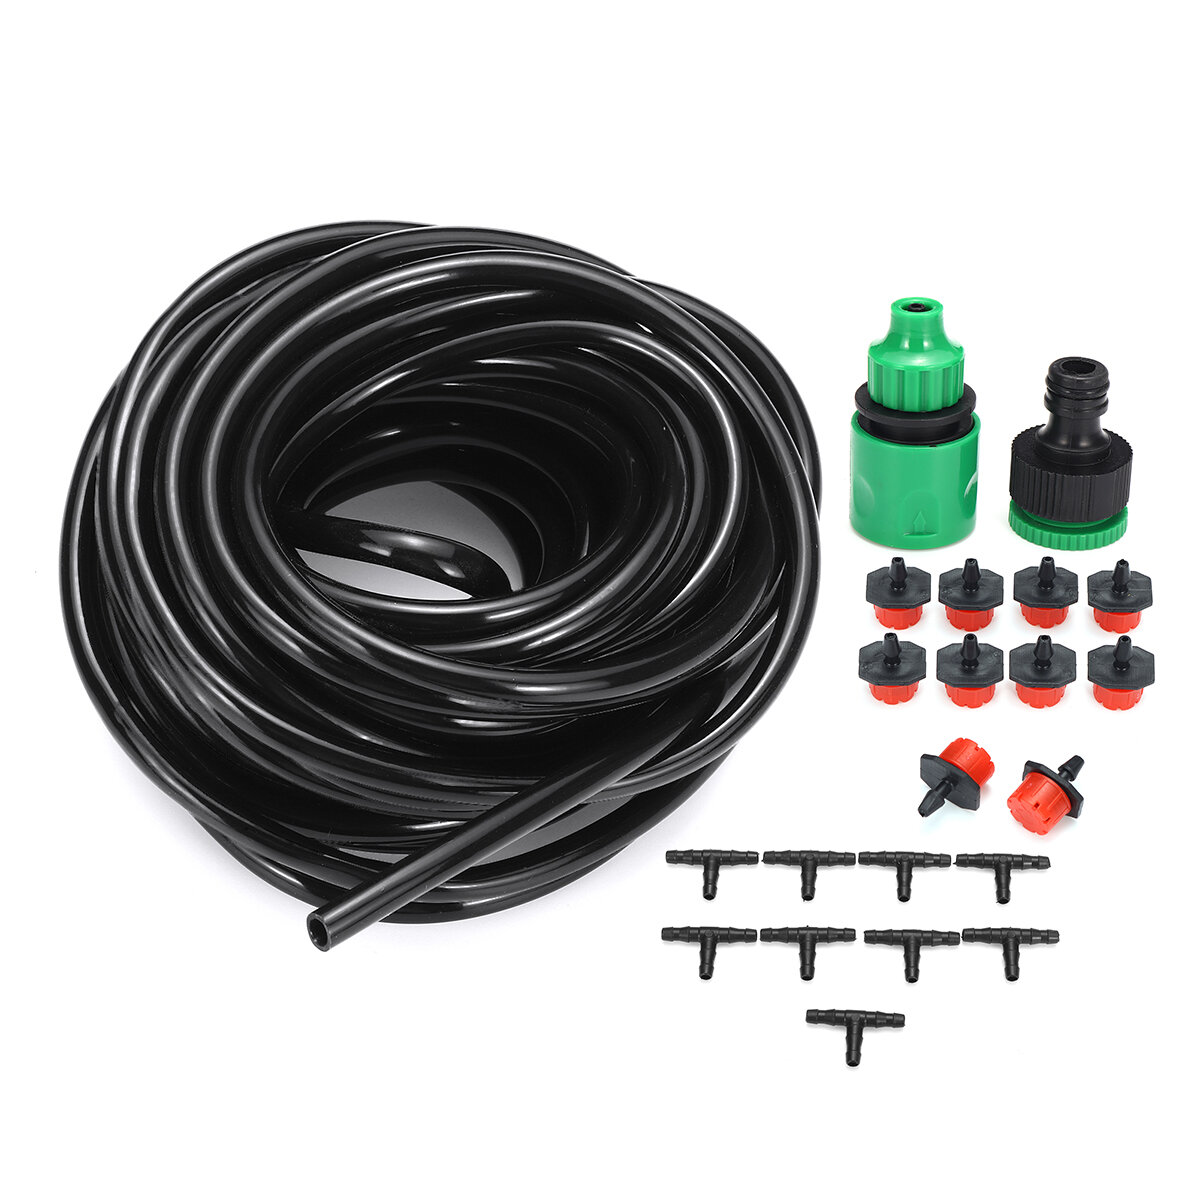 10m Hose Automatic Sprinkler Drippers Micro Irrigation Drip Plant Watering Garden System